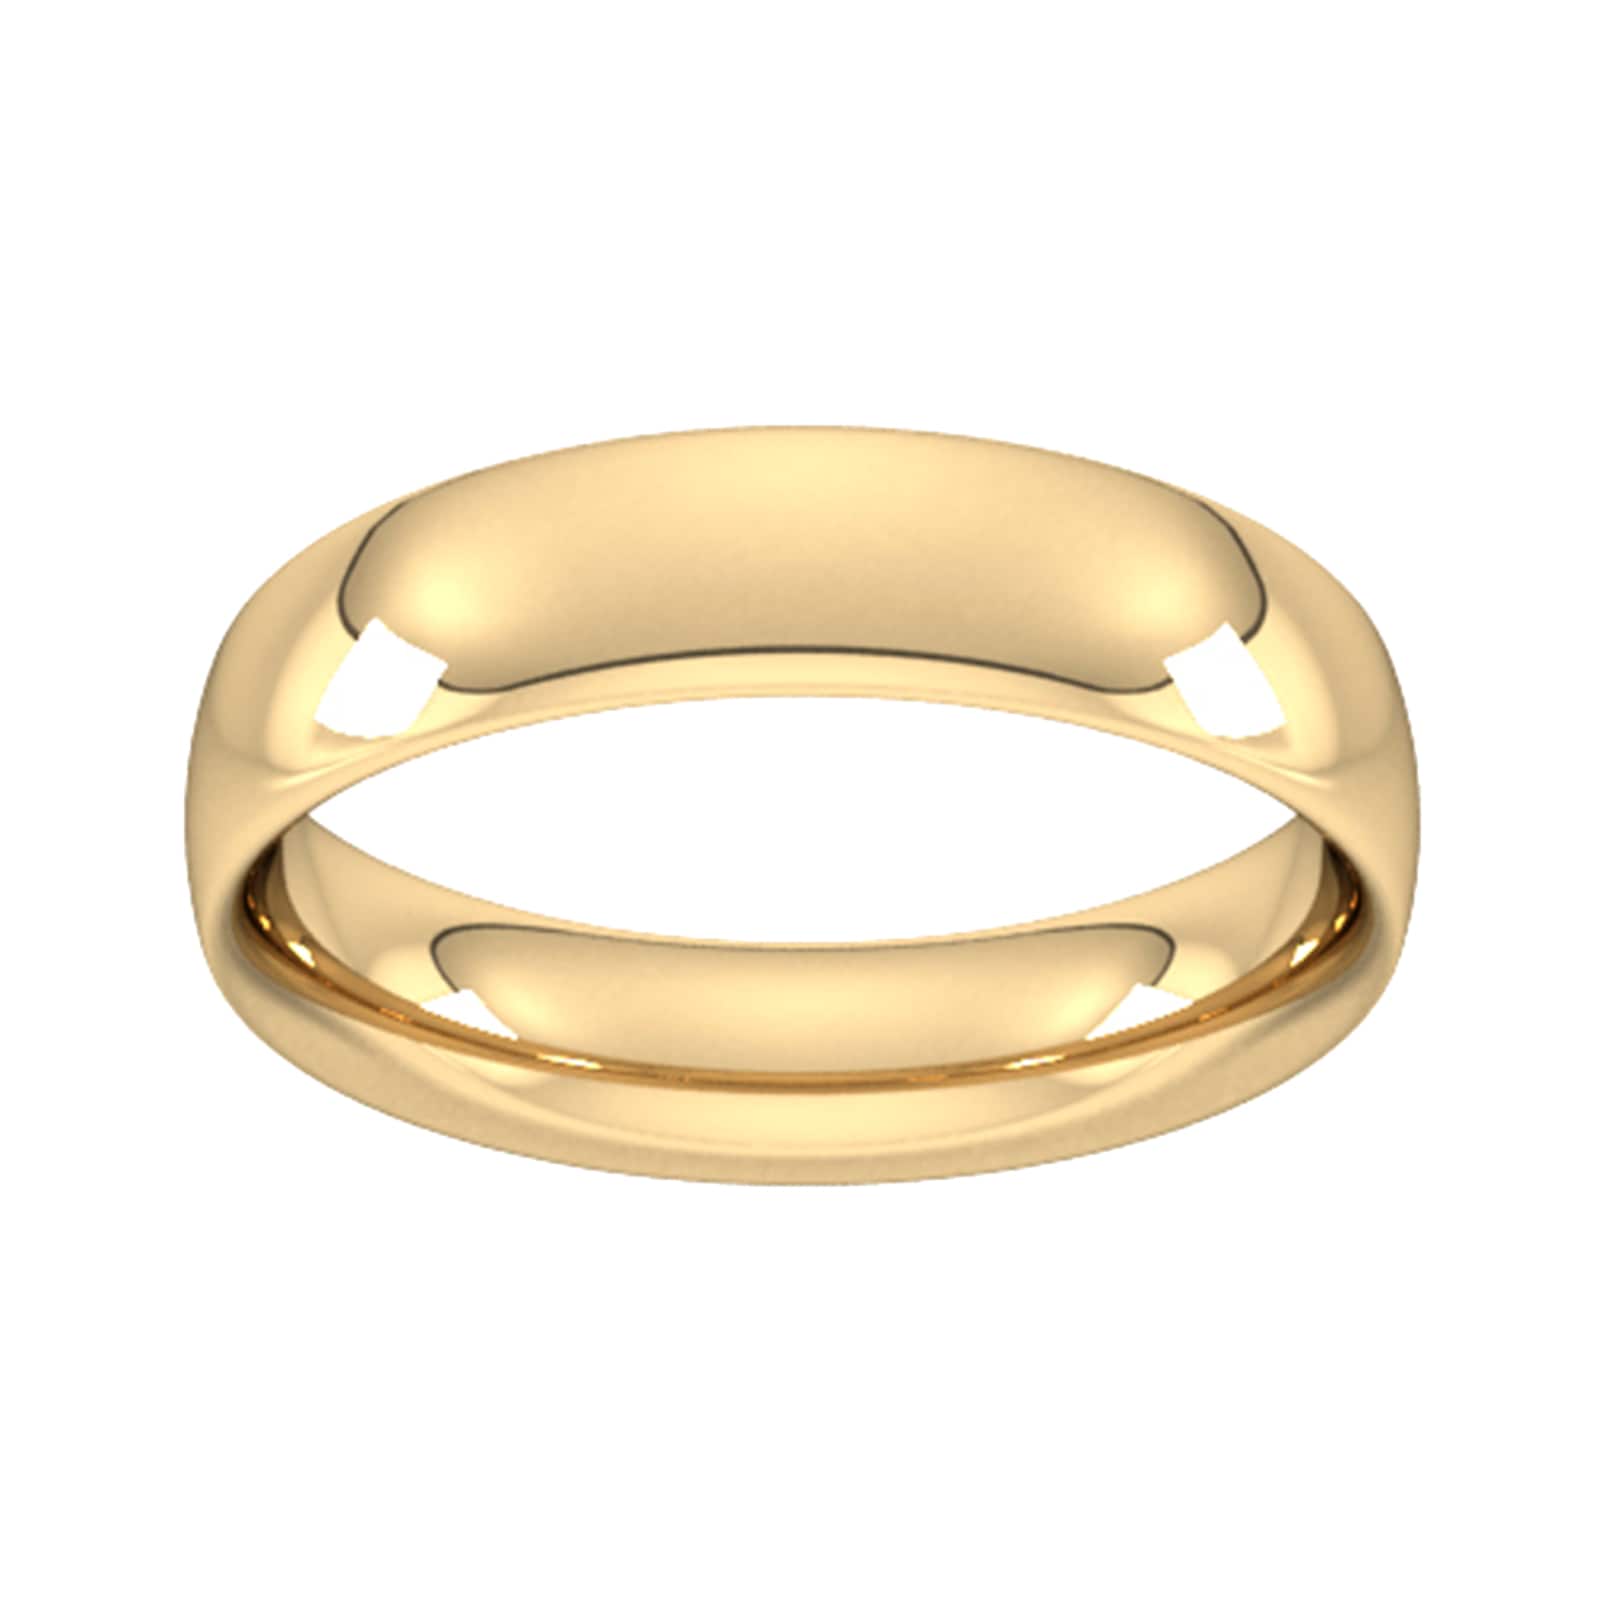 5mm Traditional Court Heavy Wedding Ring In 9 Carat Yellow Gold - Ring Size T